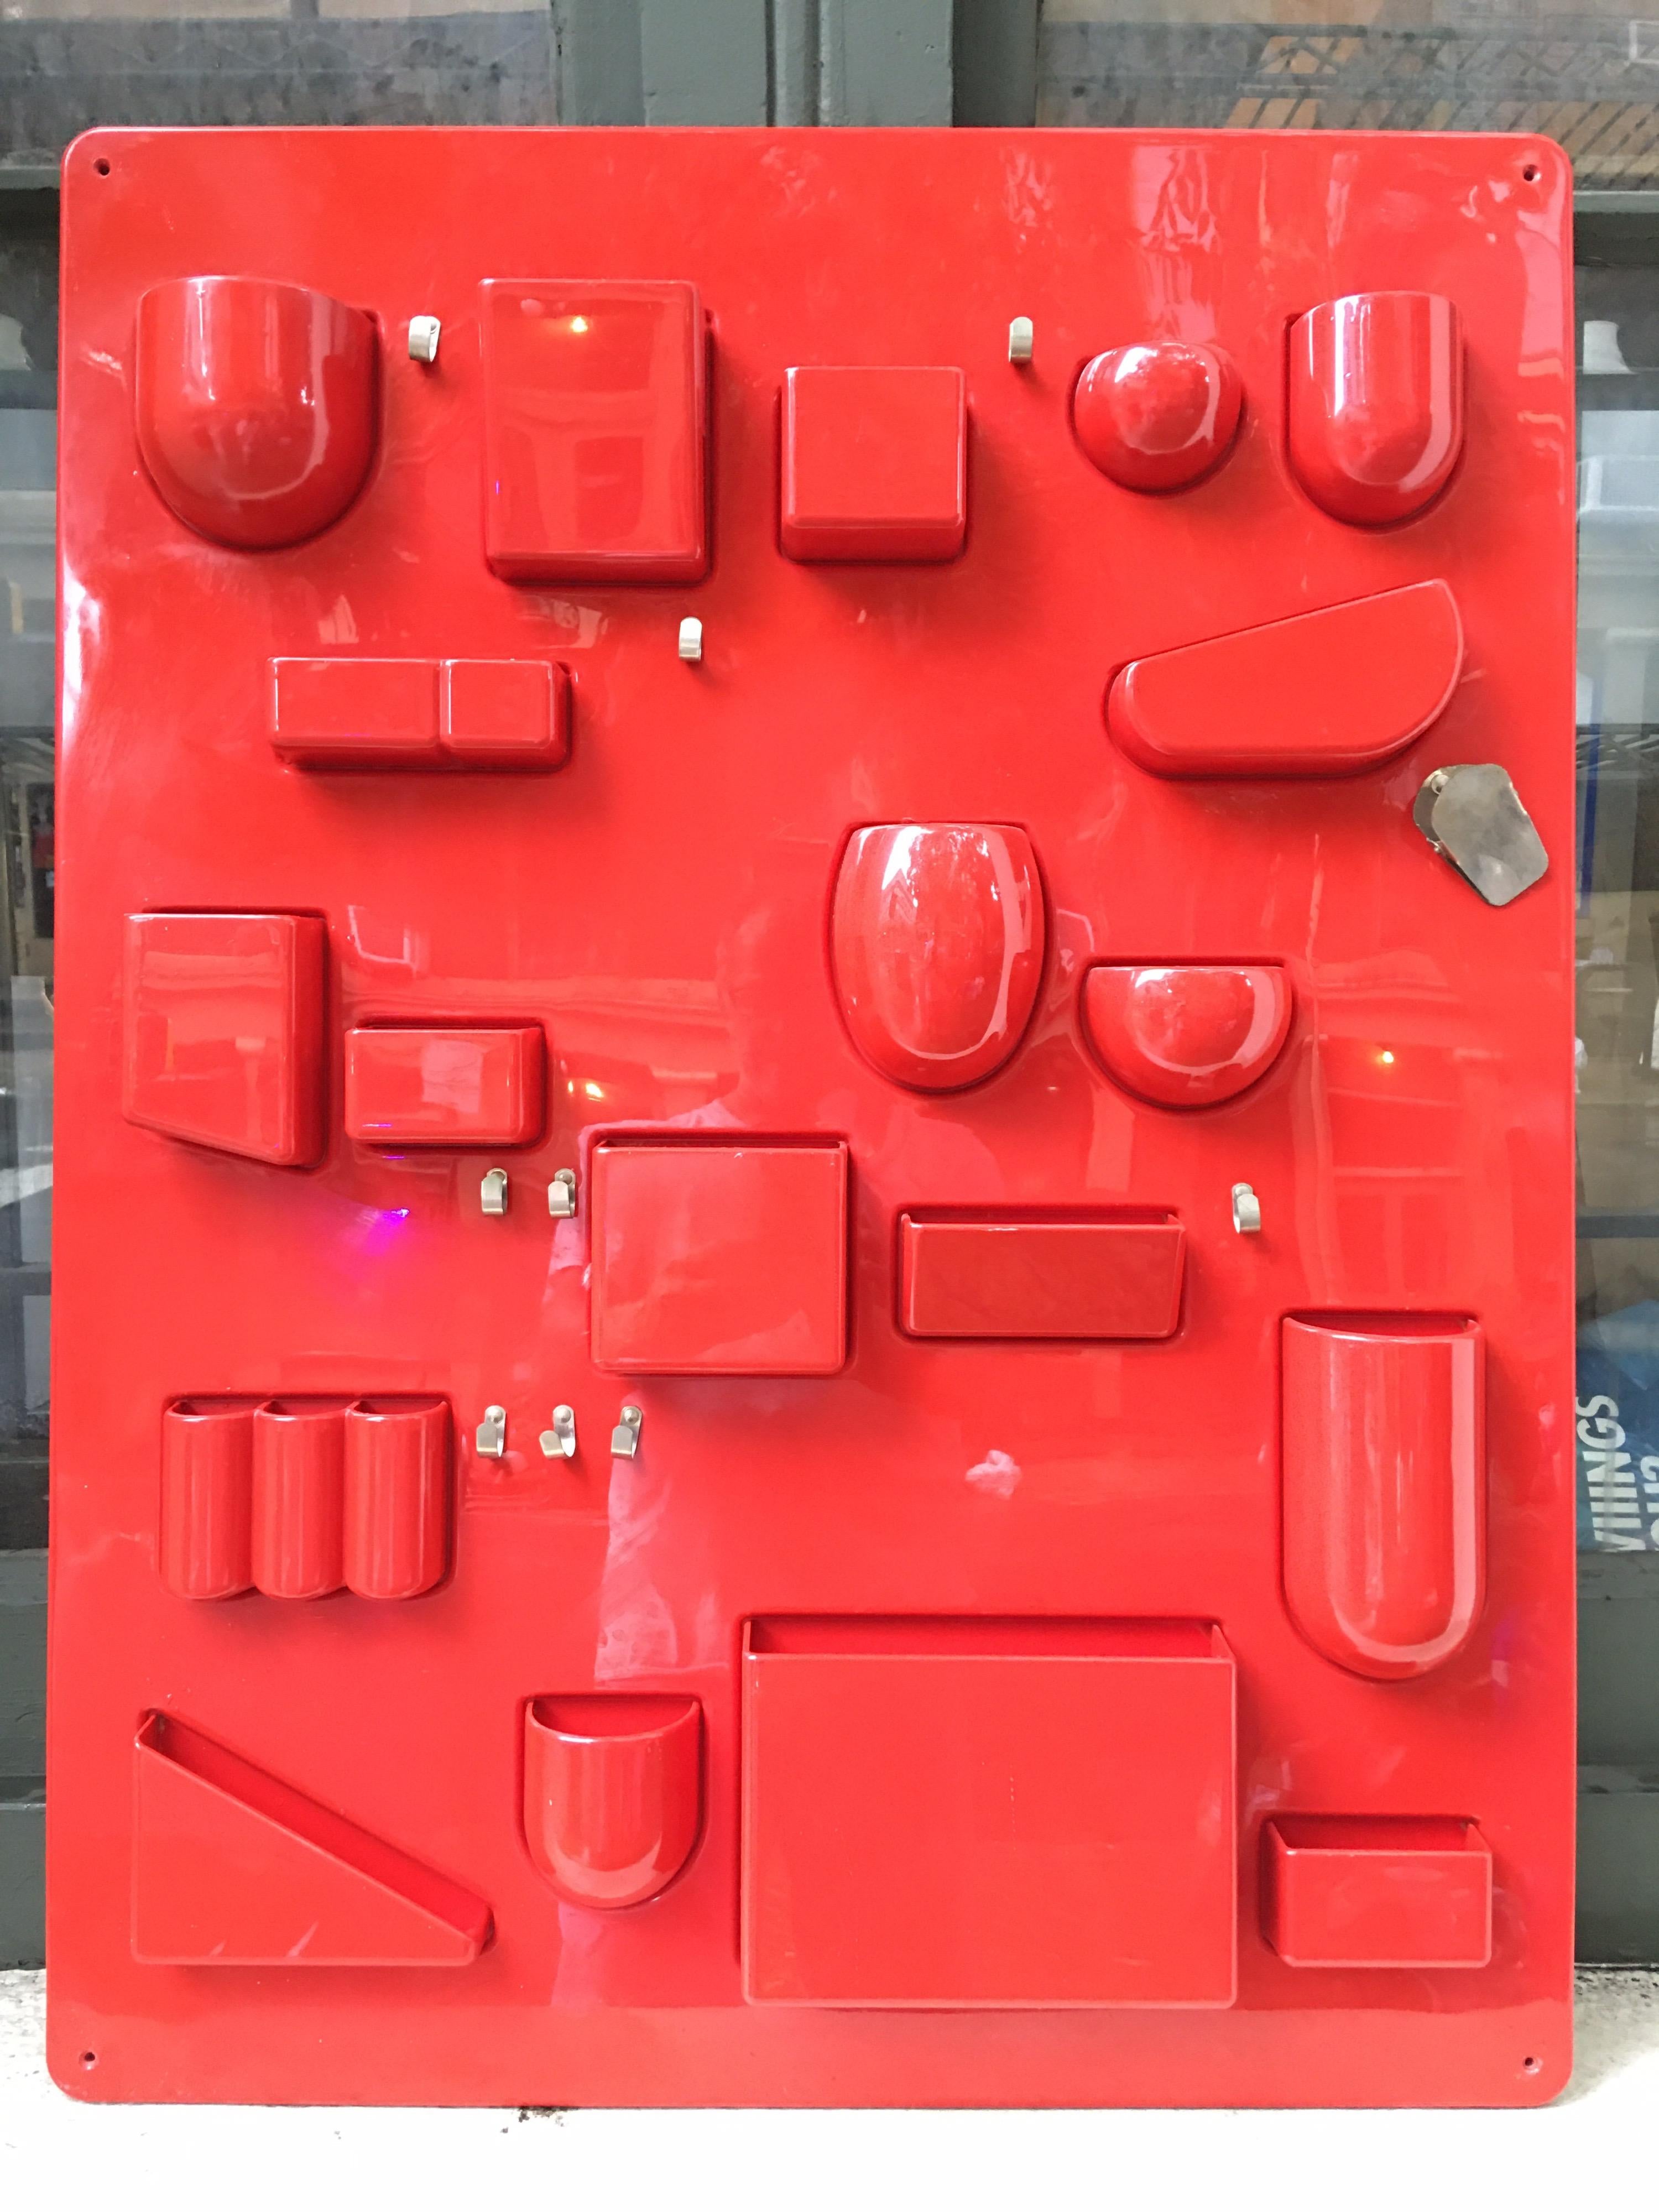 Plastic Dorothea Mauer-Becker Wall-All Wall in Red